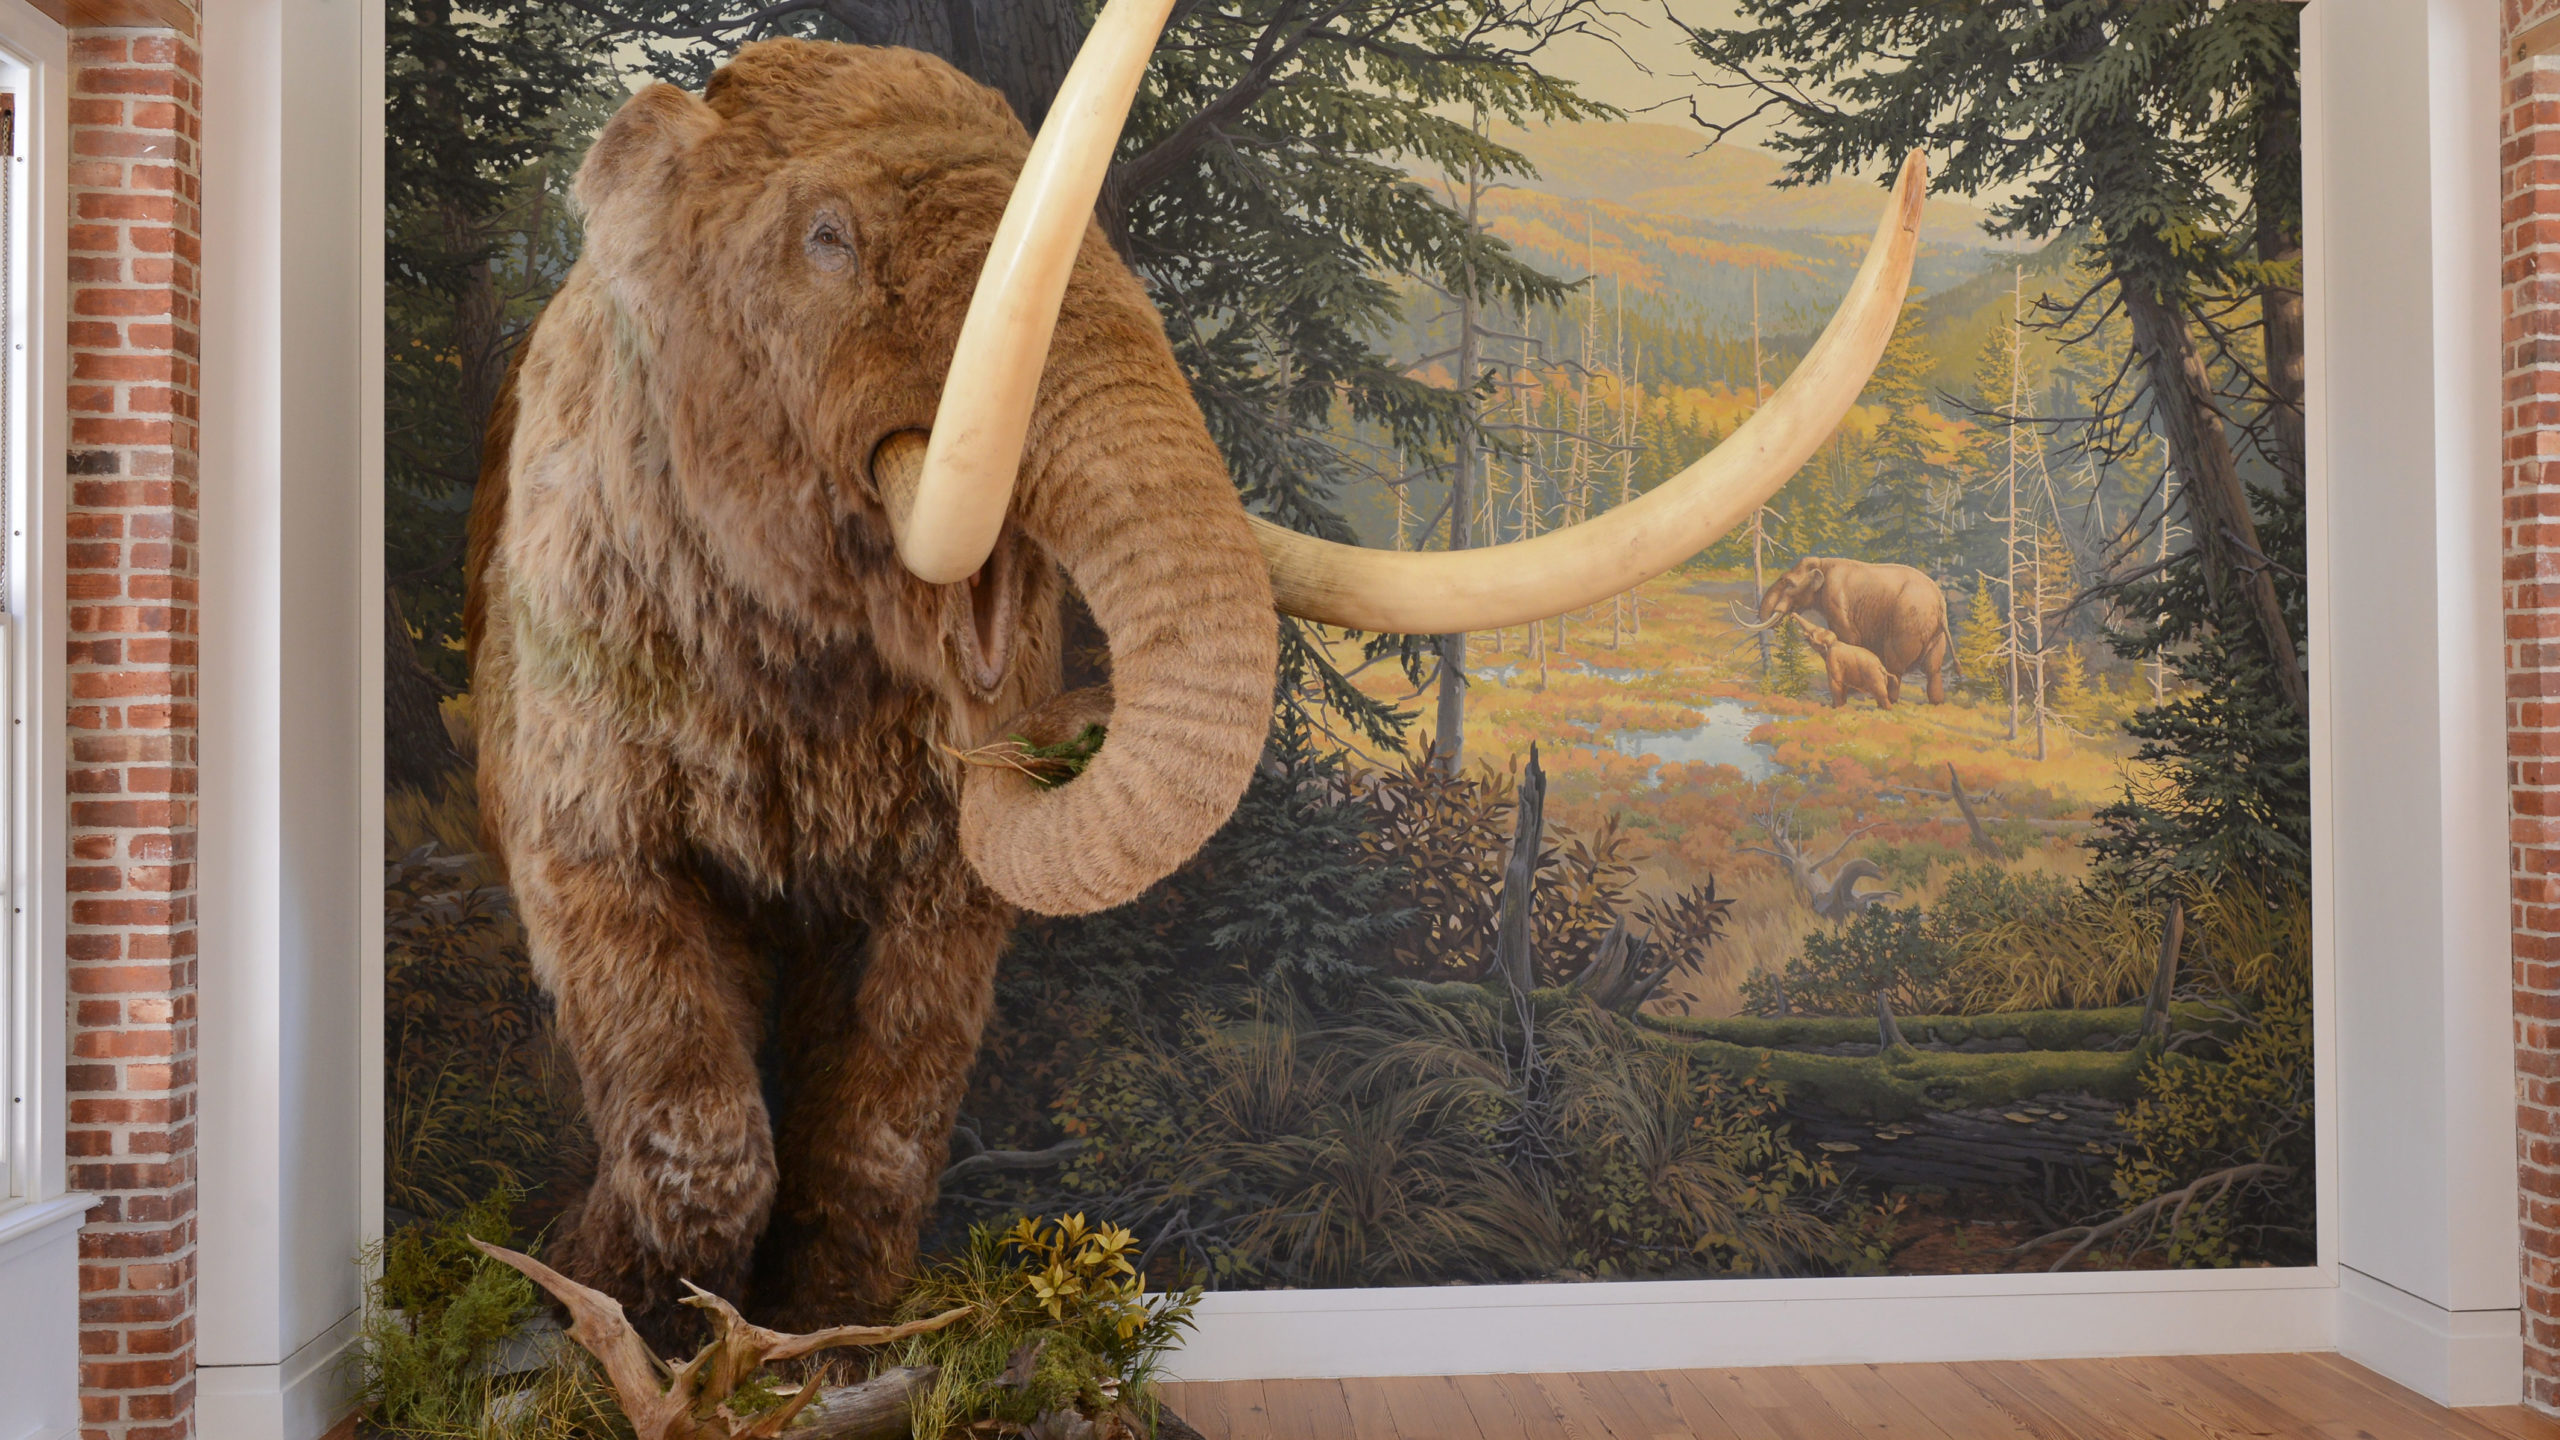 Mastodon replica emerging from the wall of a painted forest mural